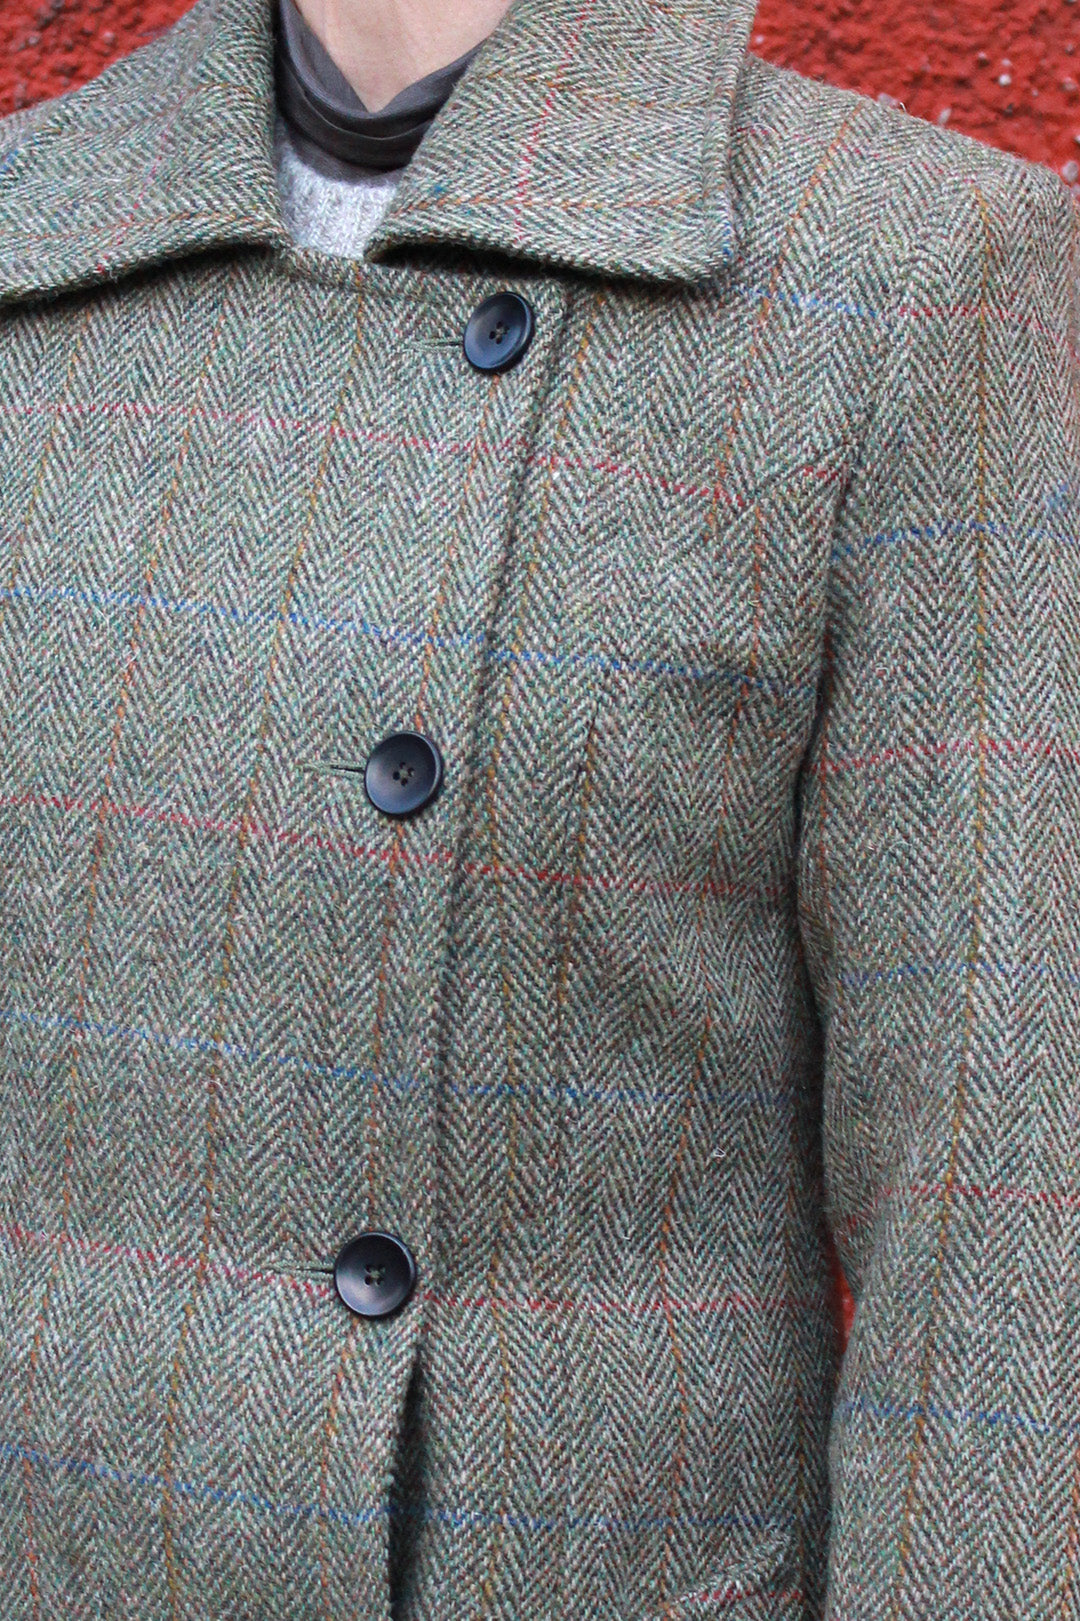 Marta coat is the latest style by Scottish designer Elizabeth Martin. This maxi length Harris Tweed® coat features offset buttons and a contrasting blue satin lining.